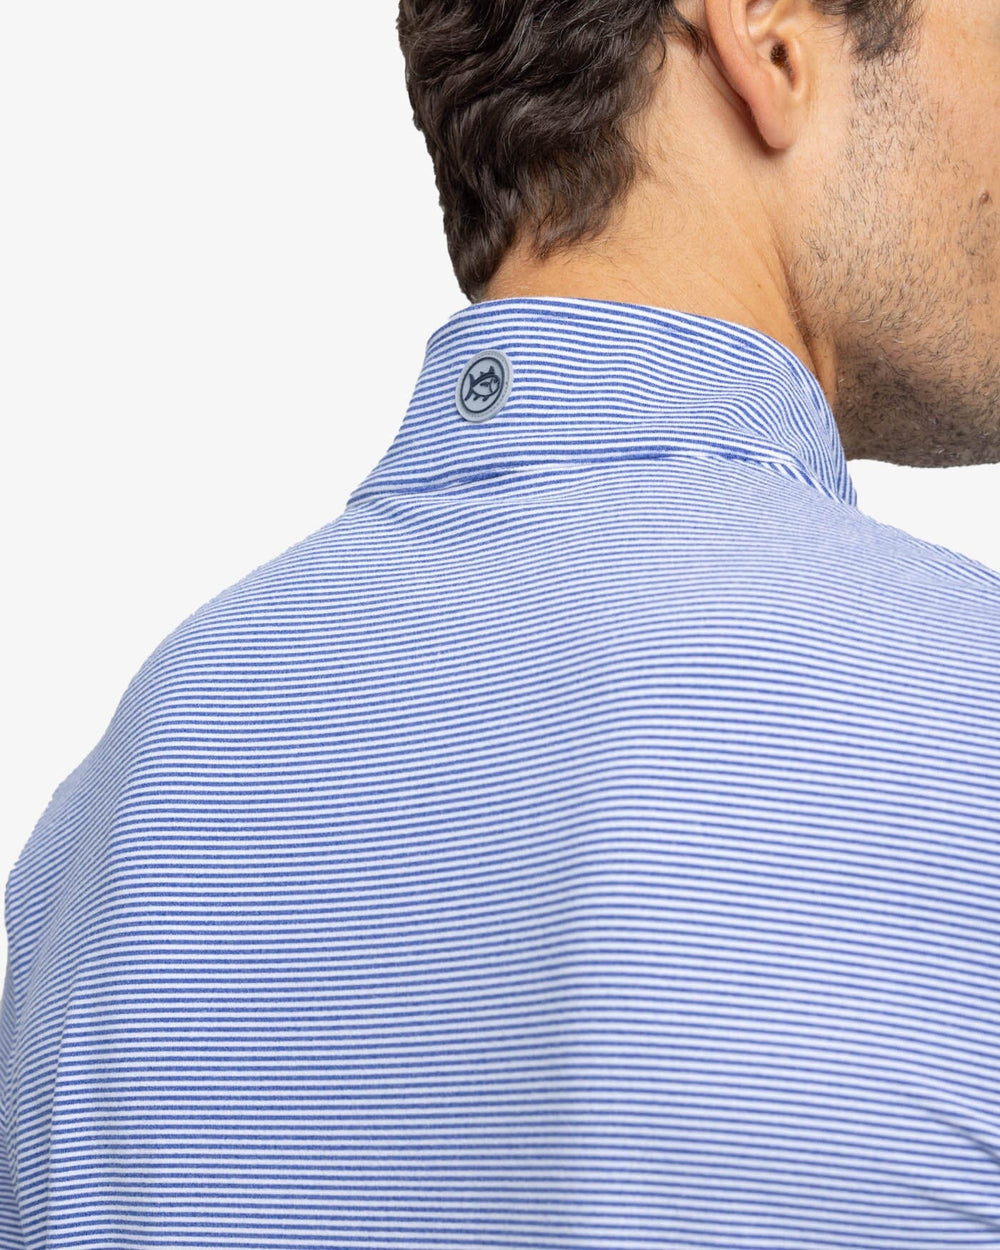 The yoke view of the Southern Tide Cruiser Micro-Stripe Heather Quarter Zip by Southern Tide - Heather University Blue